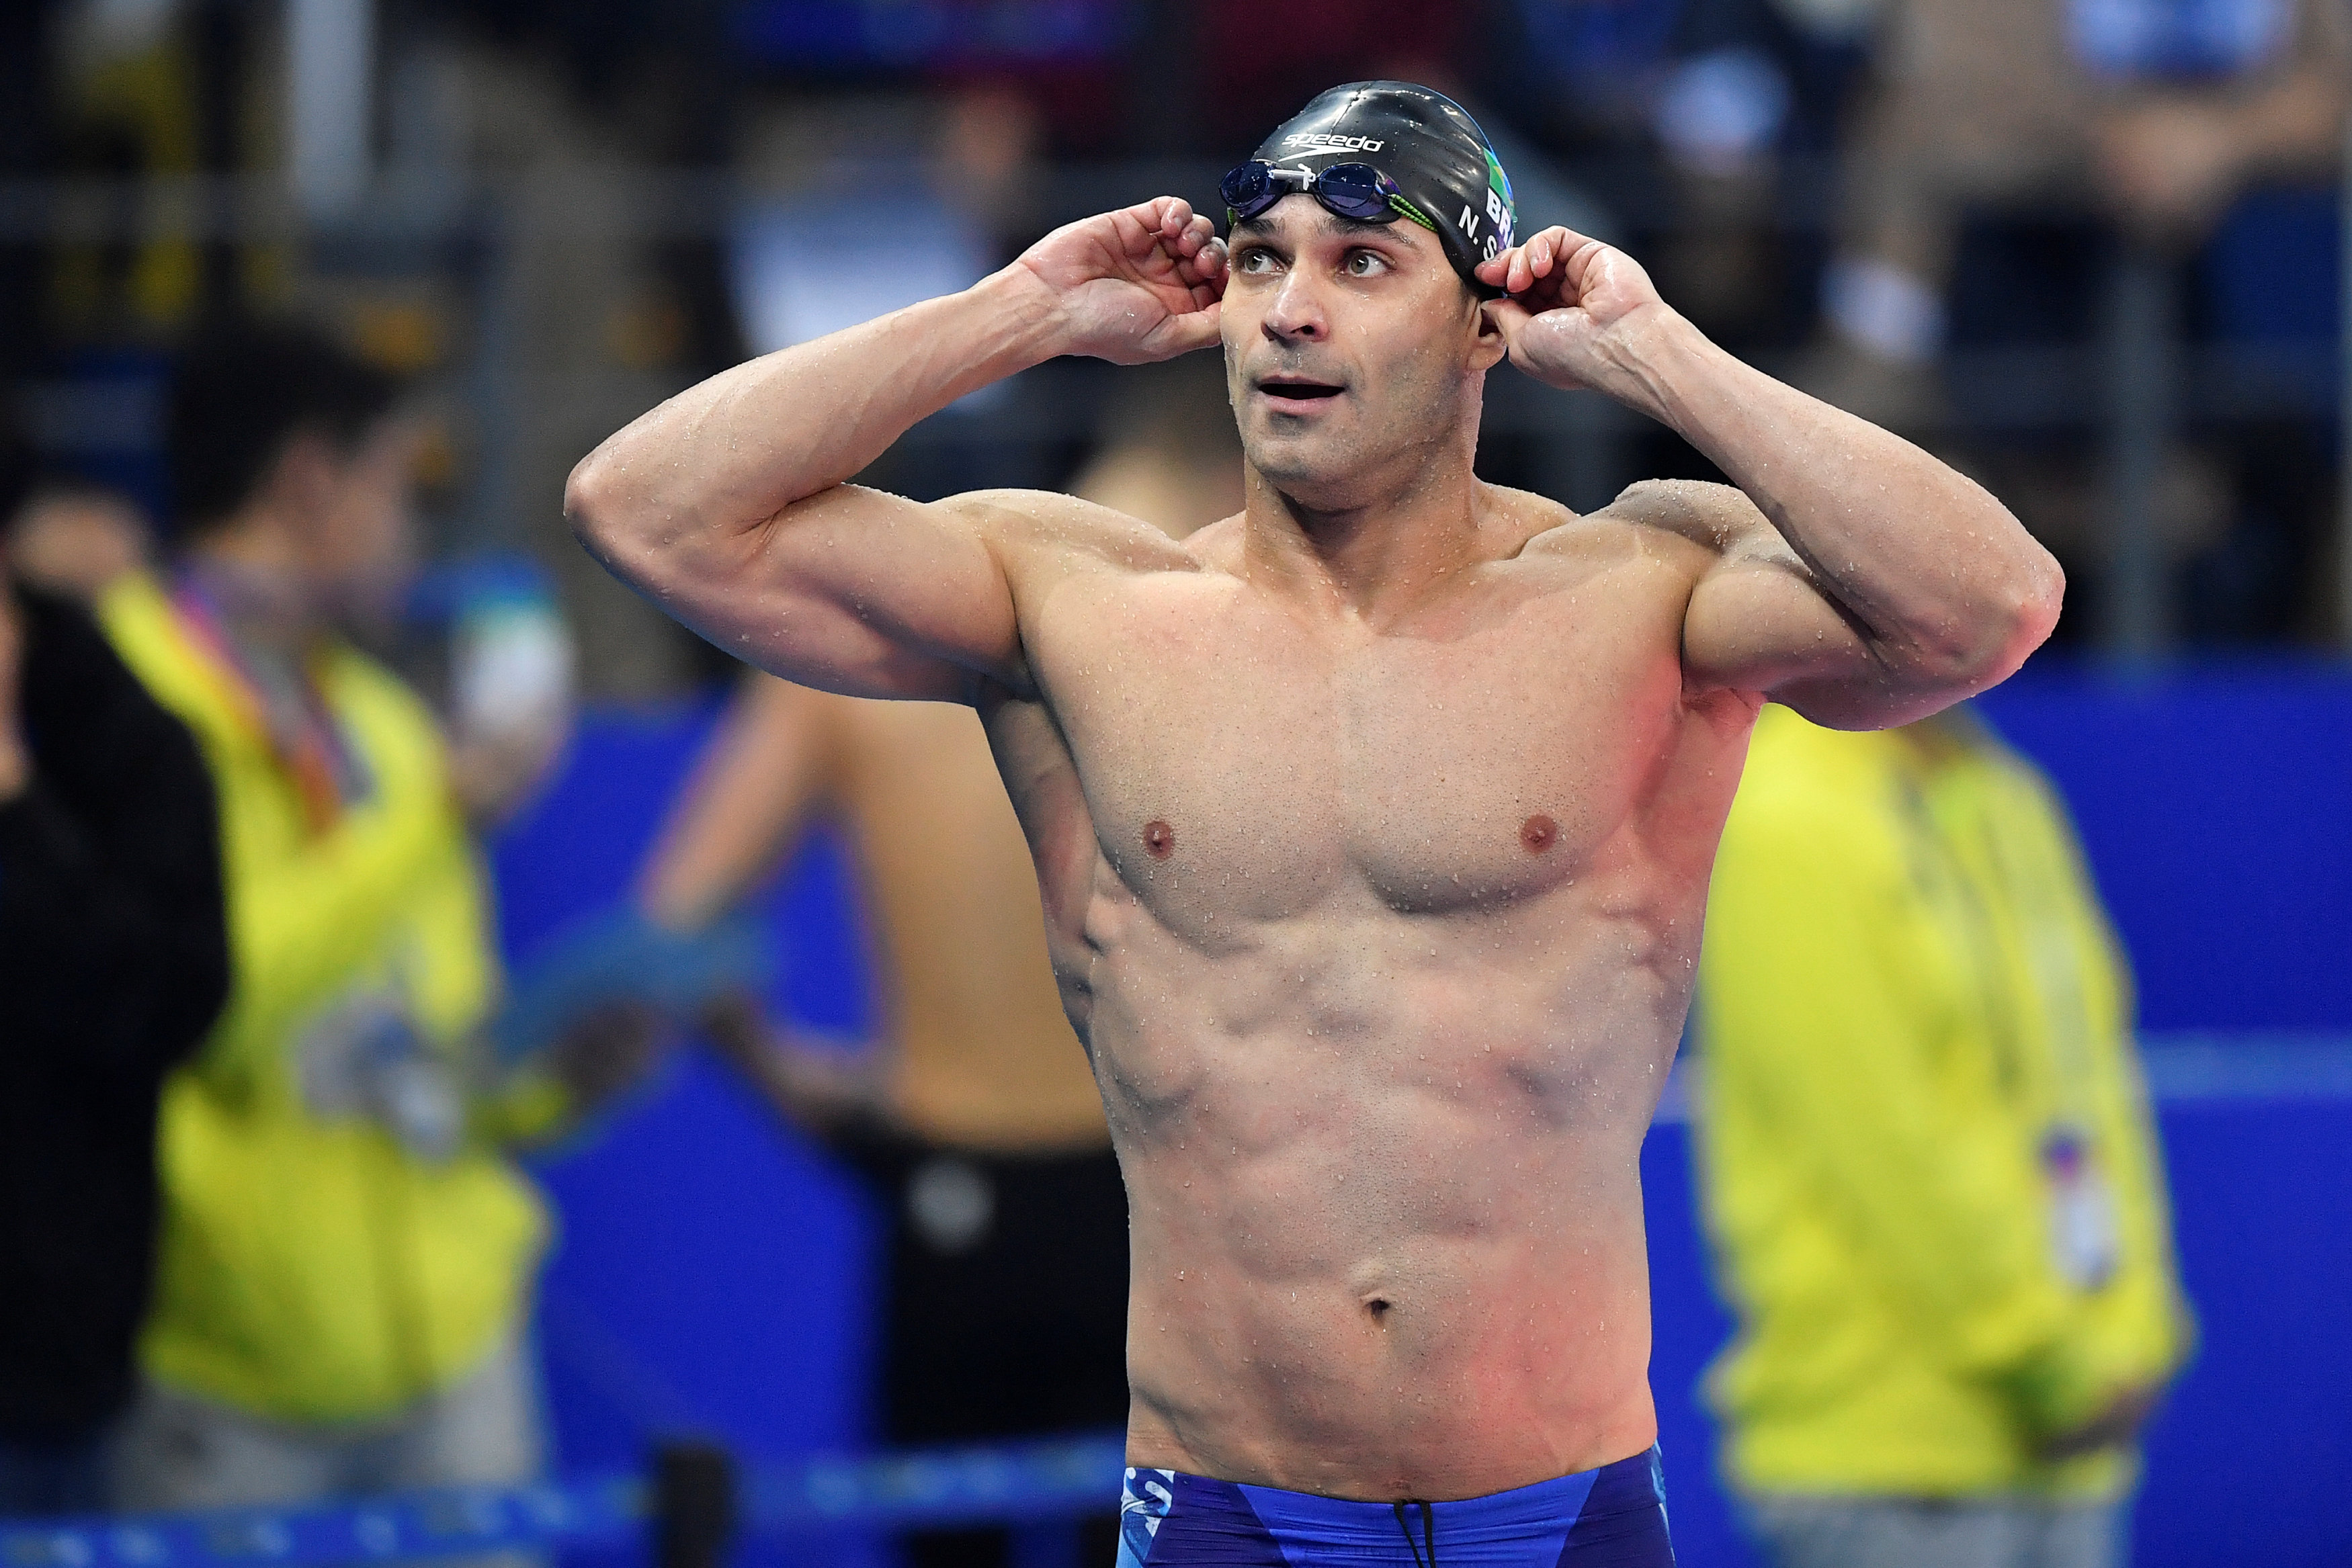 Brazilian swimmer Nicholas Santos still a force in the butterfly at age 42